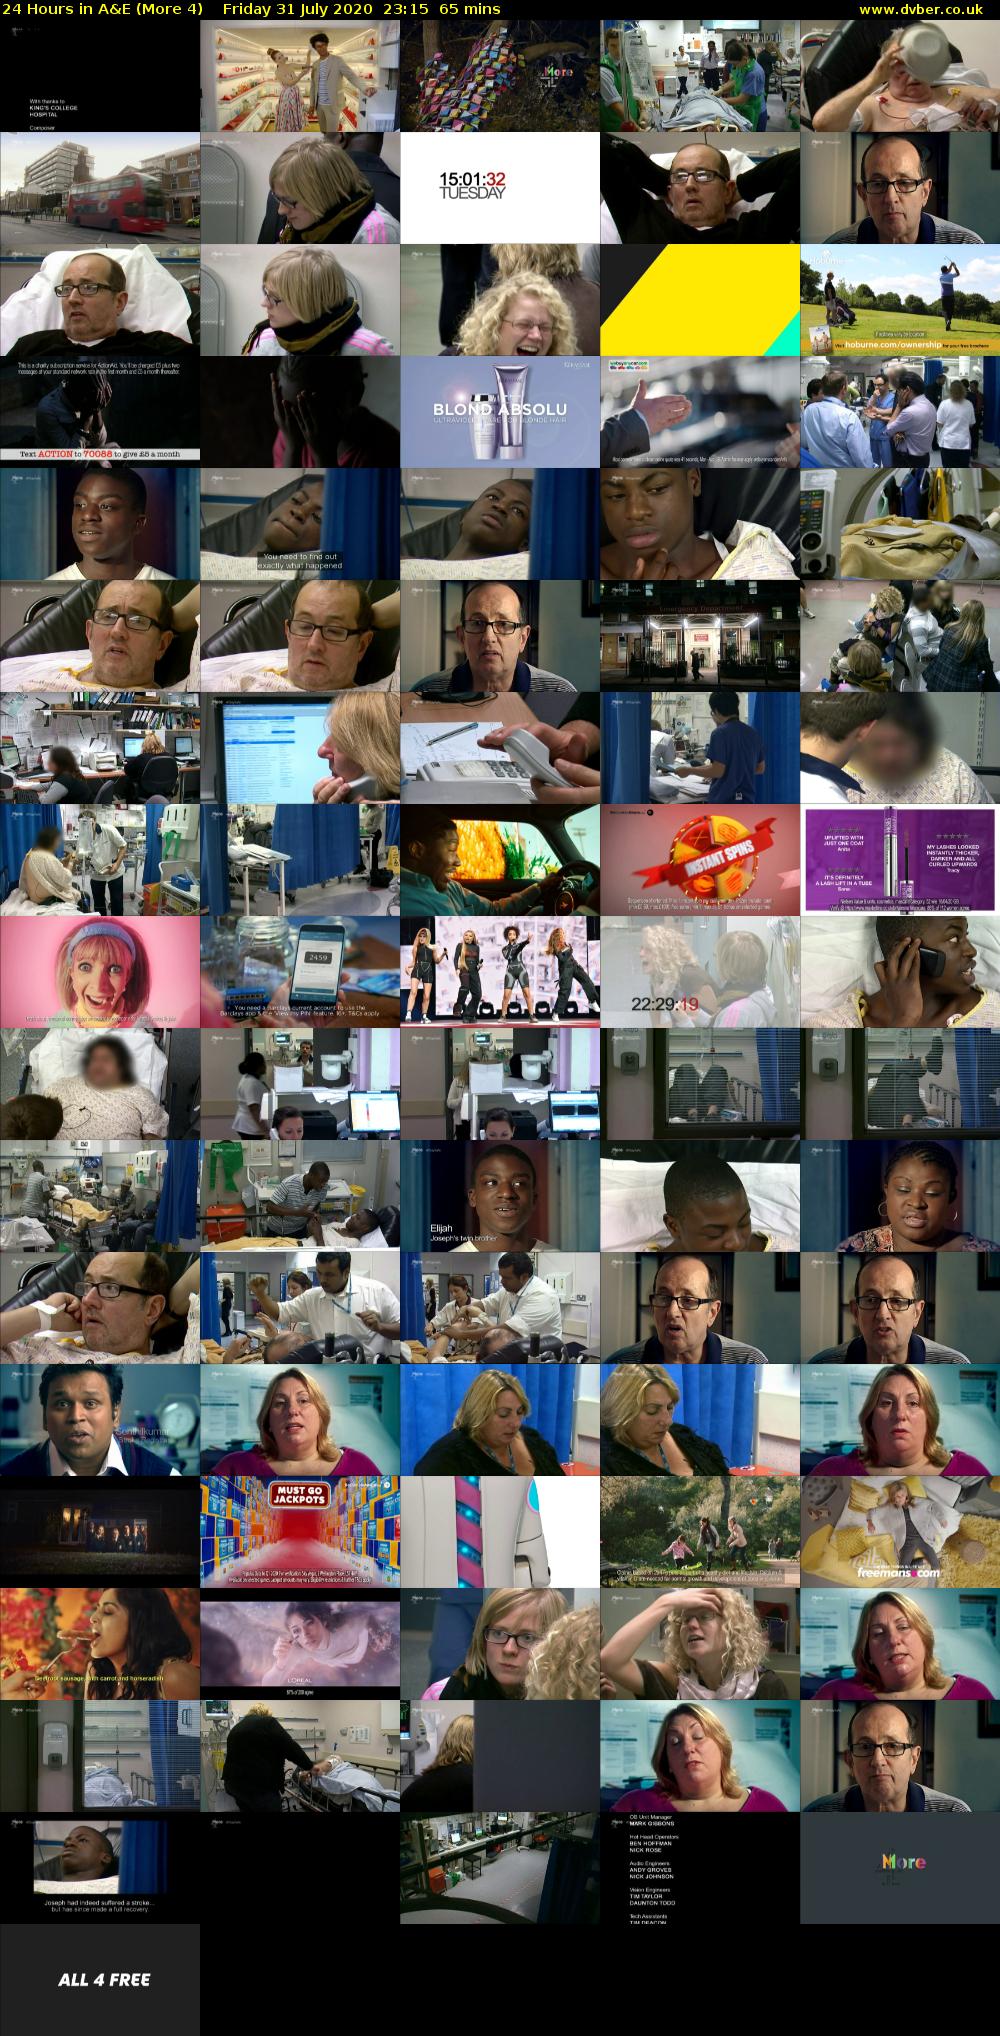 24 Hours in A&E (More 4) Friday 31 July 2020 23:15 - 00:20